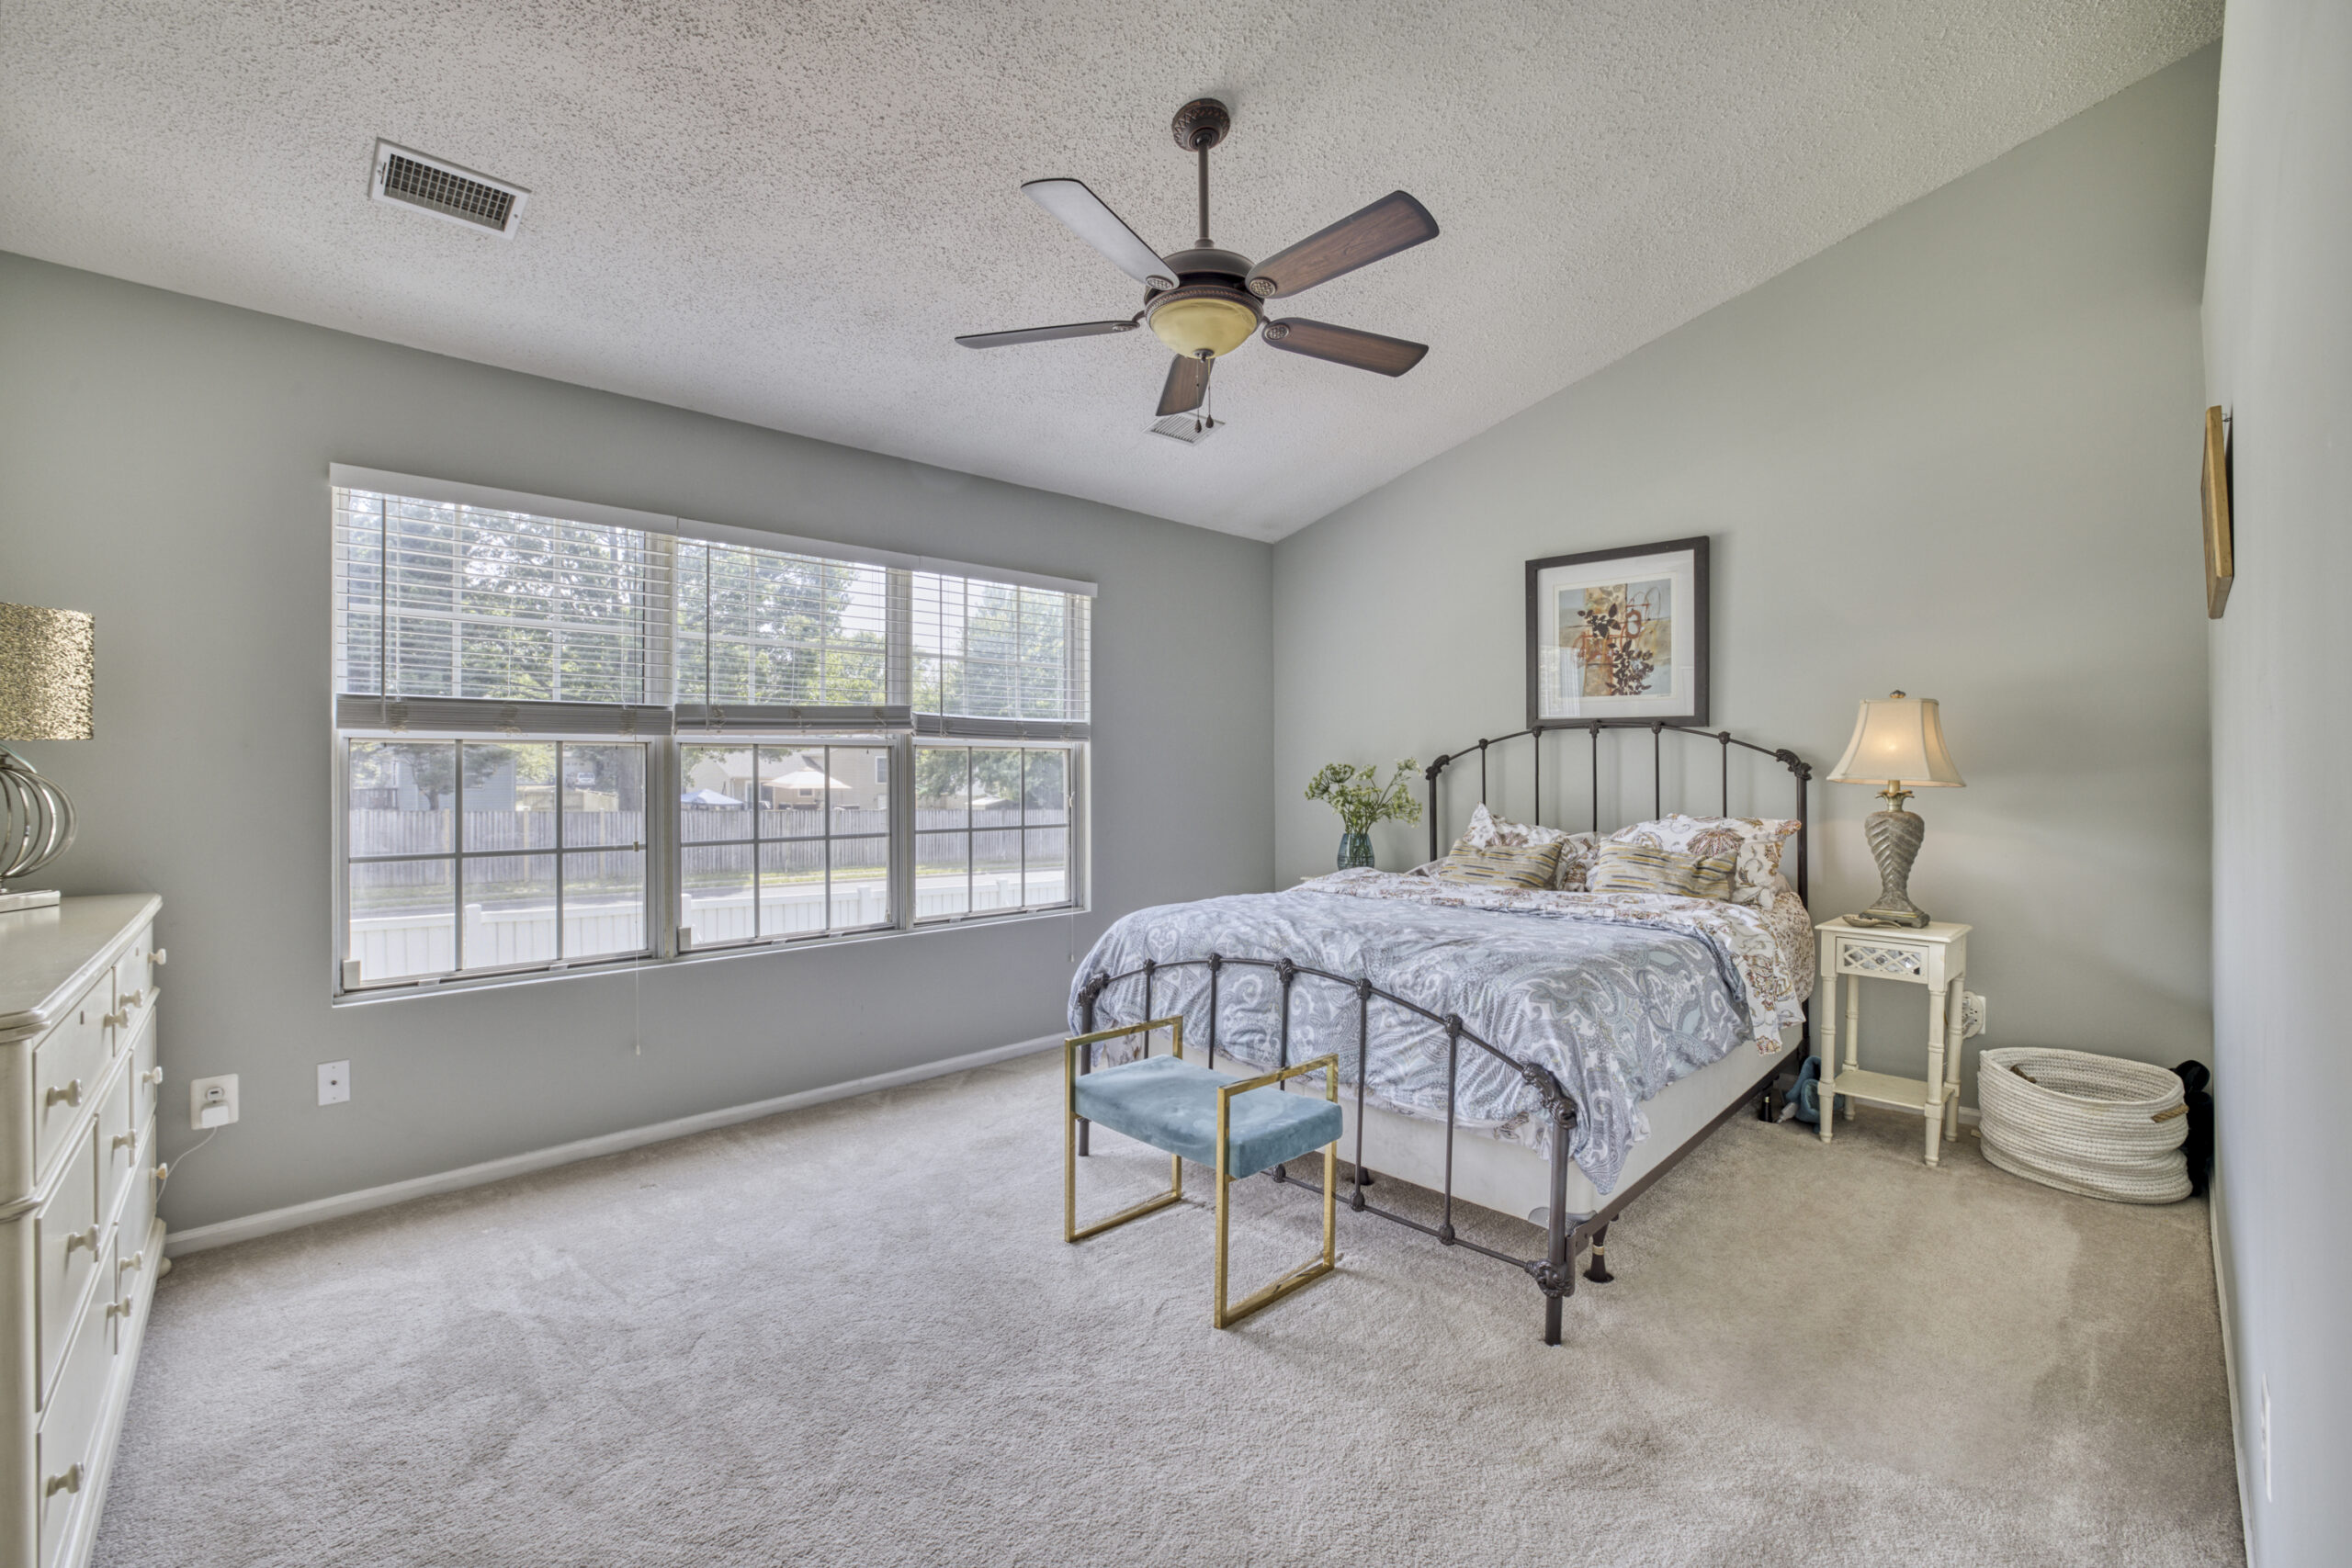 Professional interior photo of 12309 Stalwart Court - showing the primary bedroom with vaulted ceiling, cream carpeting and large windows